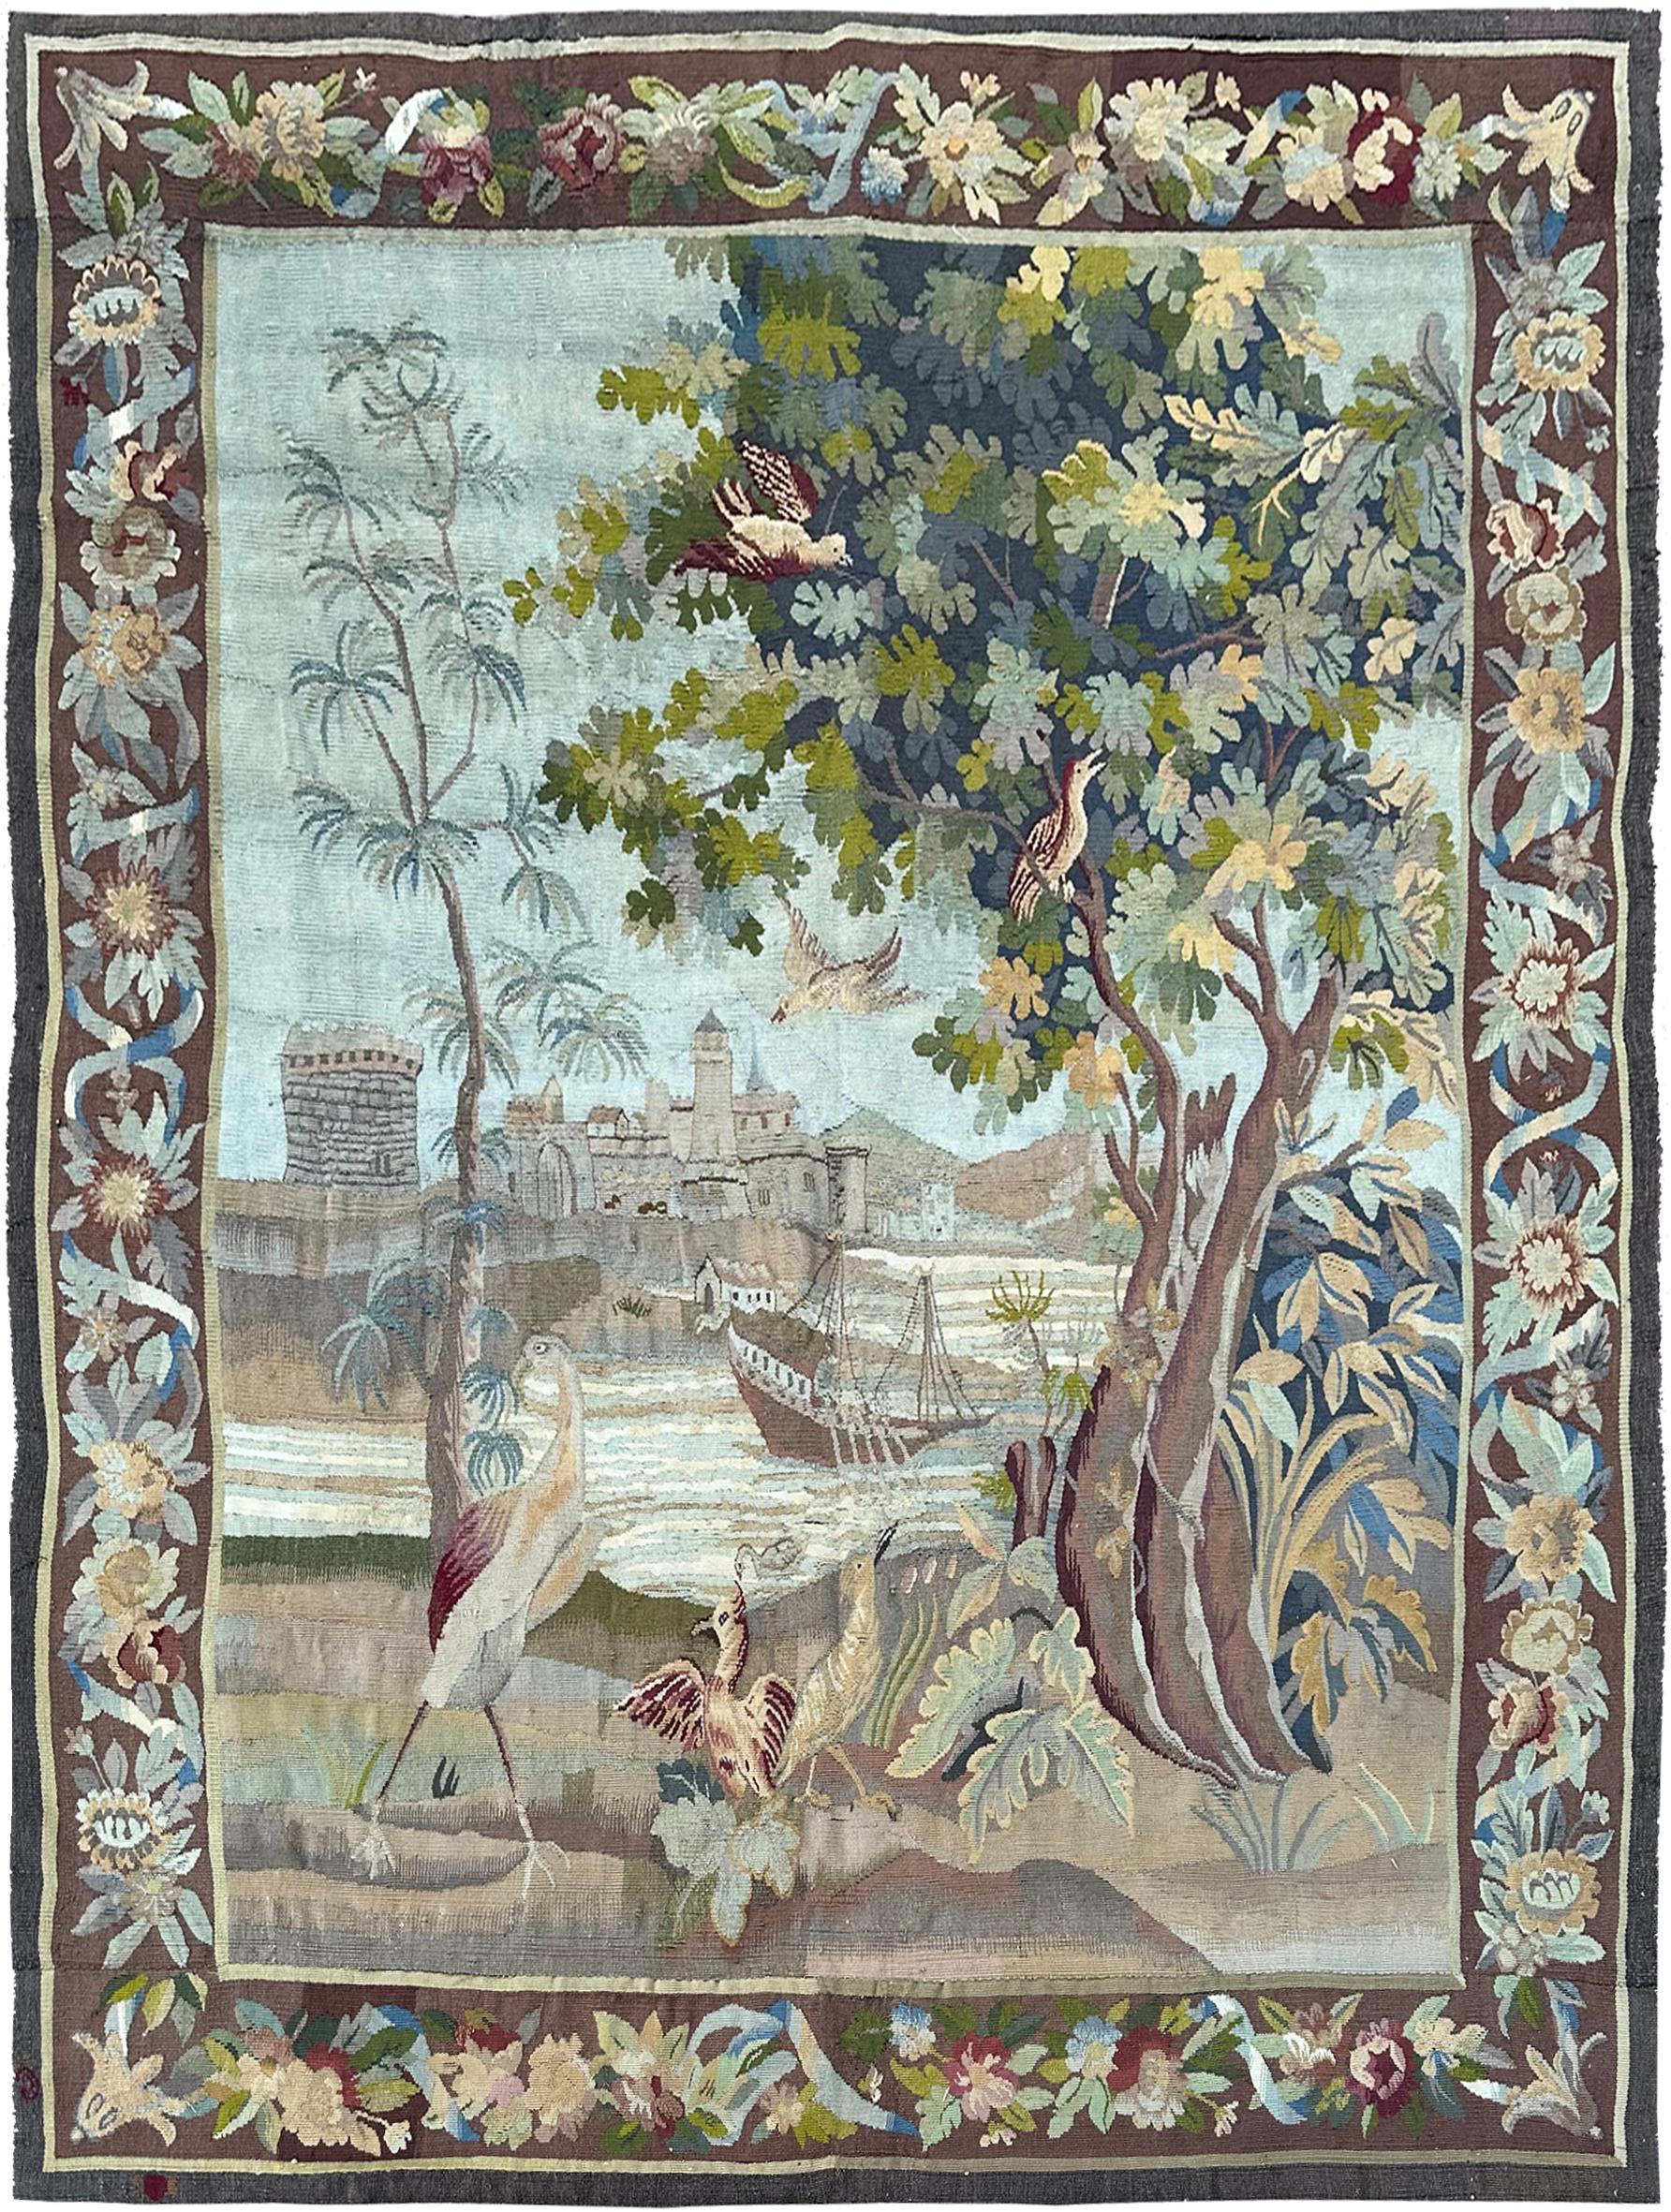 Antique French Tapestry Verdure Signed 1880 Wool & Silk 5x7 153cm x 201cm

A magnificent antique French tapestry depicting a castle amongst a river, verdure, and exotic birds. Beautiful colorway, and an easy, chic addition to any space.